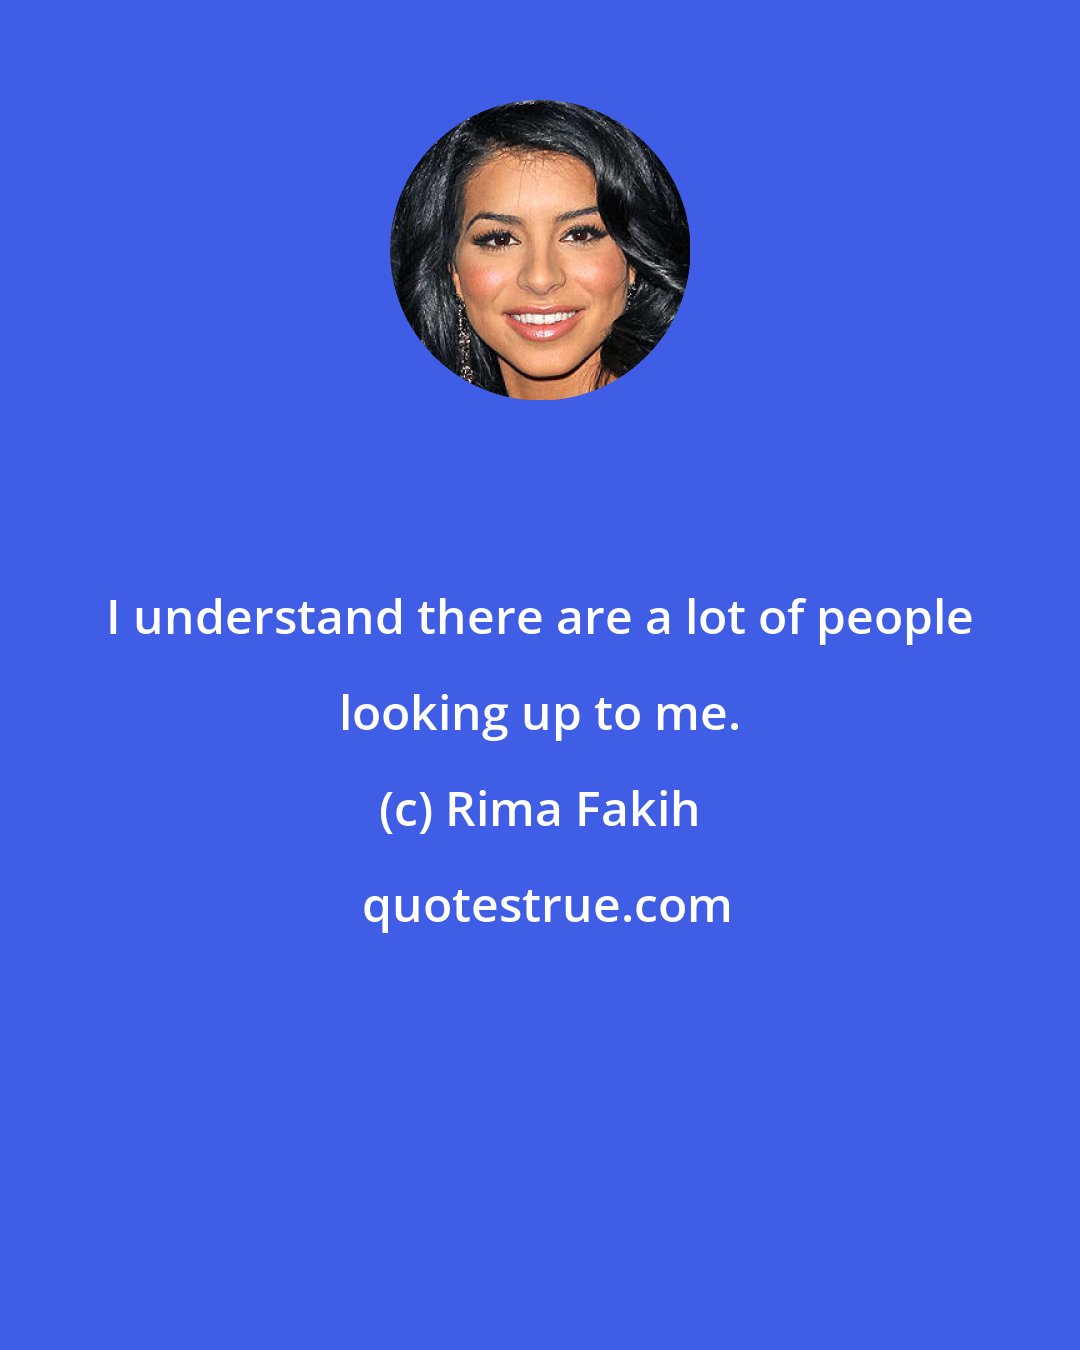 Rima Fakih: I understand there are a lot of people looking up to me.